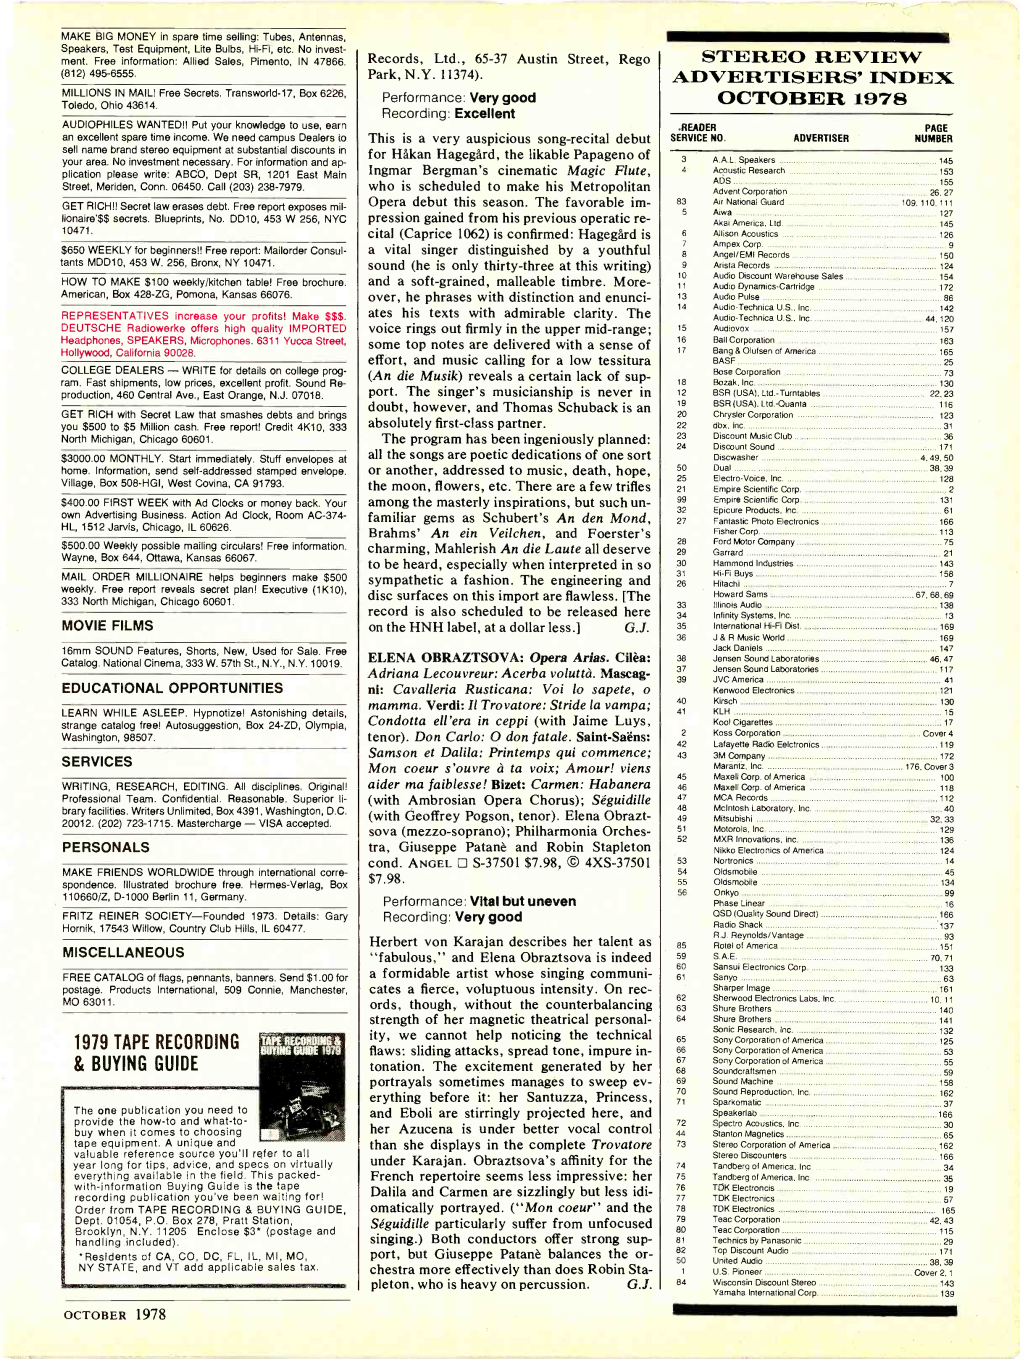 Stereo Review Advertisers' Index October 1978